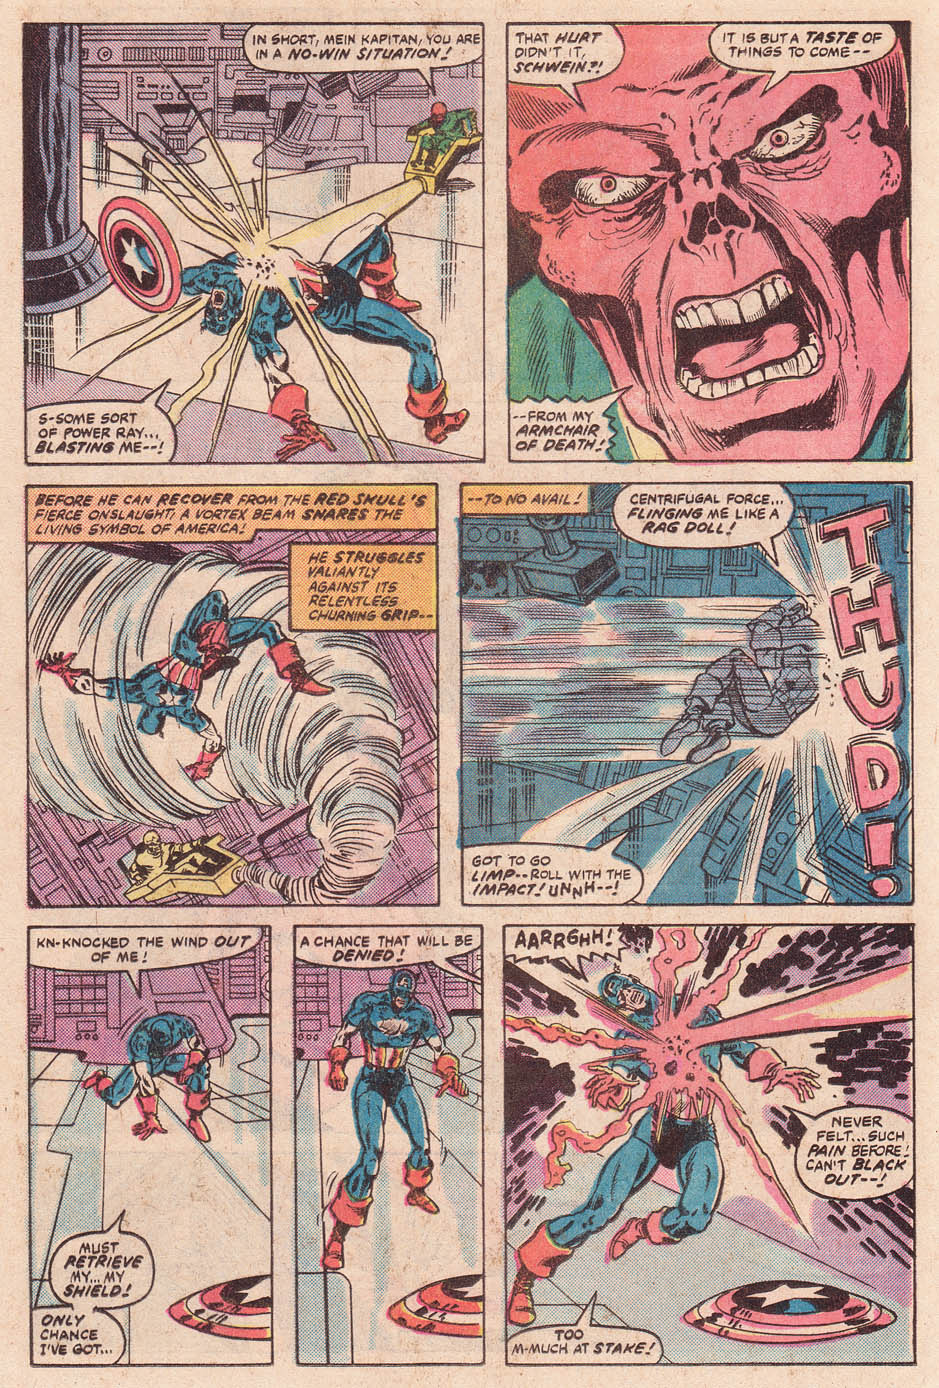 What If? (1977) issue 38 - Daredevil and Captain America - Page 24